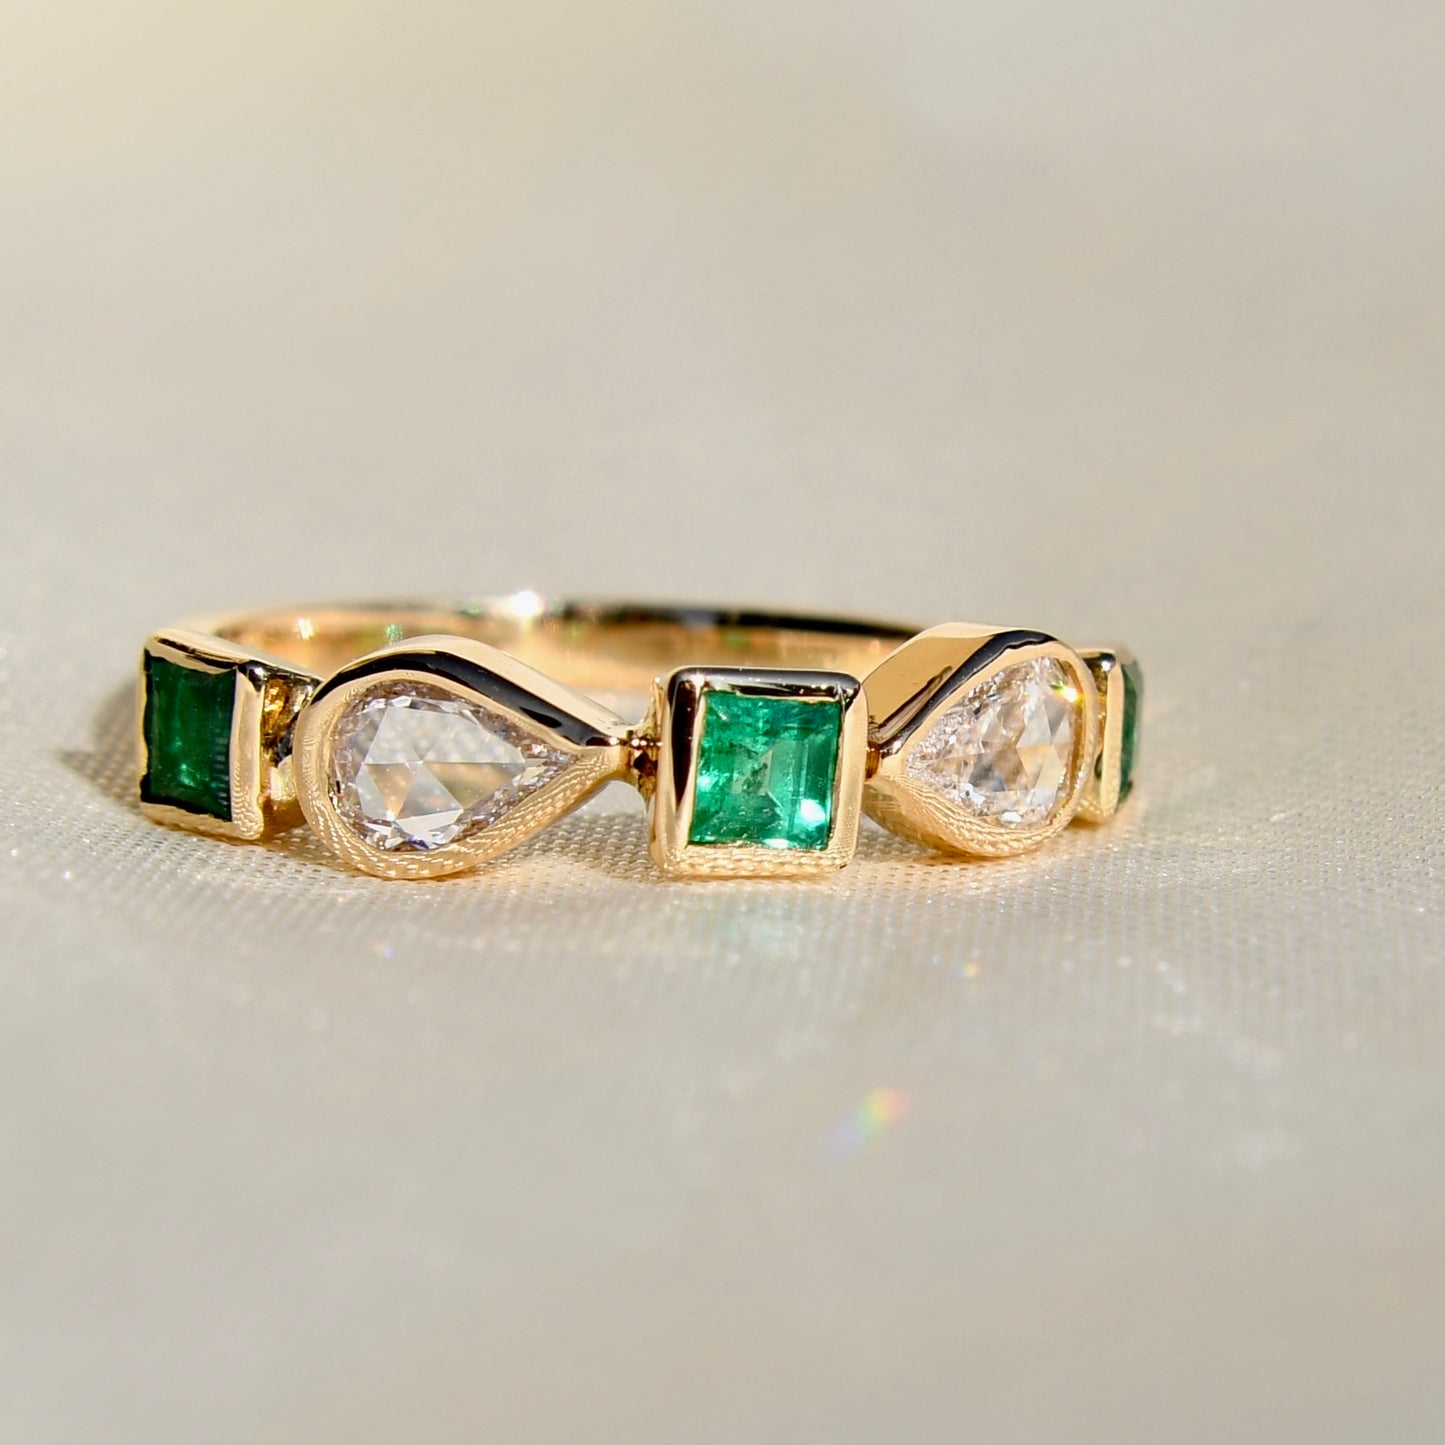 0.40ct rose cut diamond and emerald five stone ring